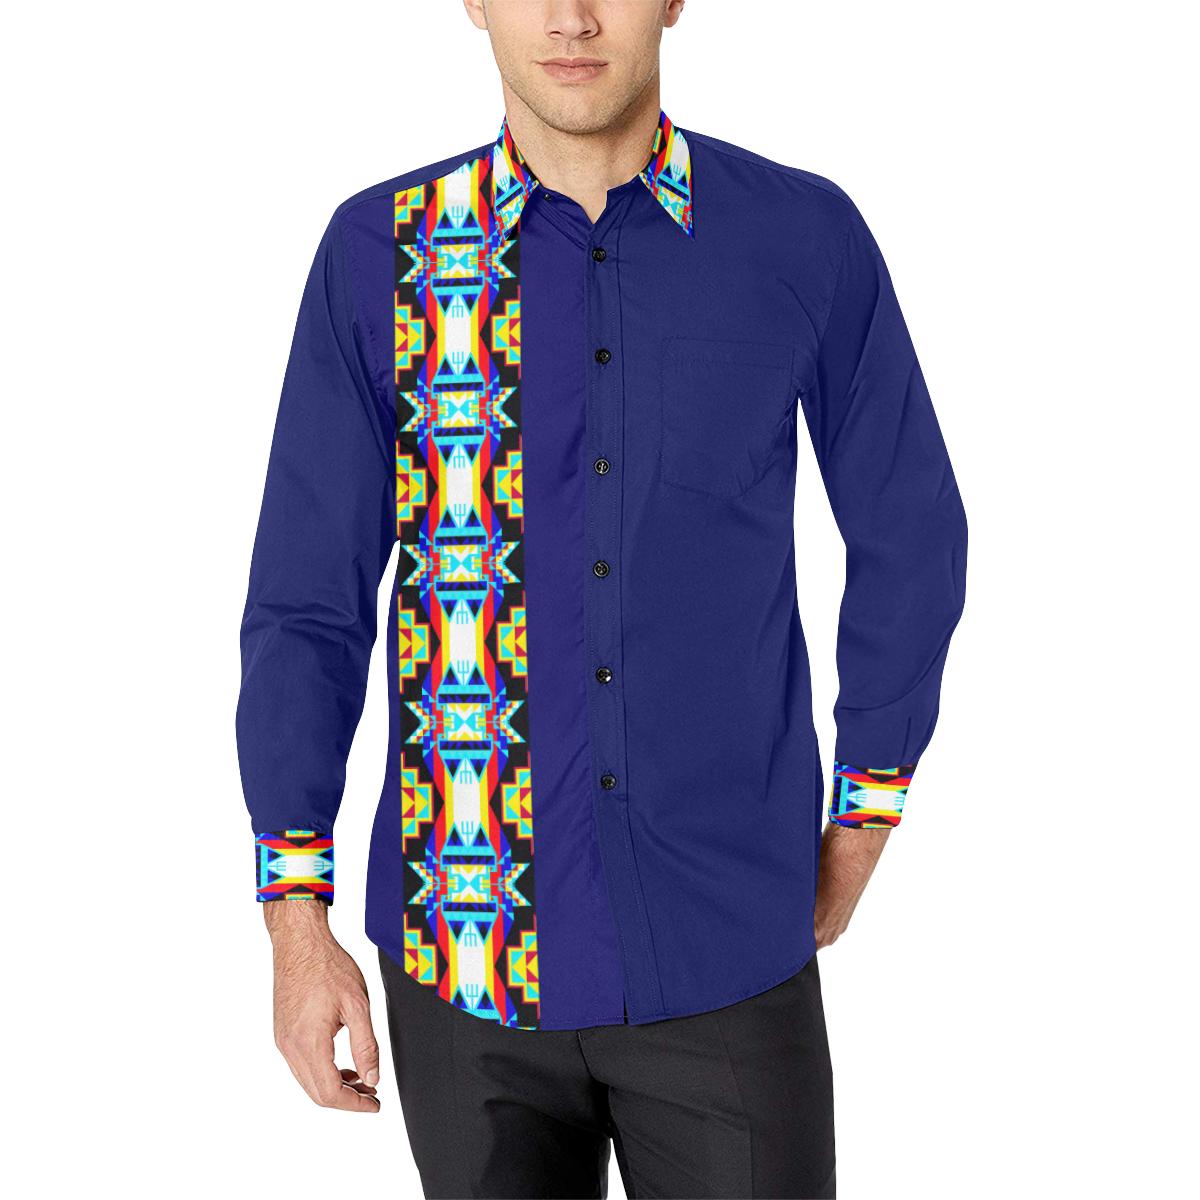 Strip for Shirt Men's All Over Print Casual Dress Shirt (Model T61) Men's Dress Shirt (T61) e-joyer 